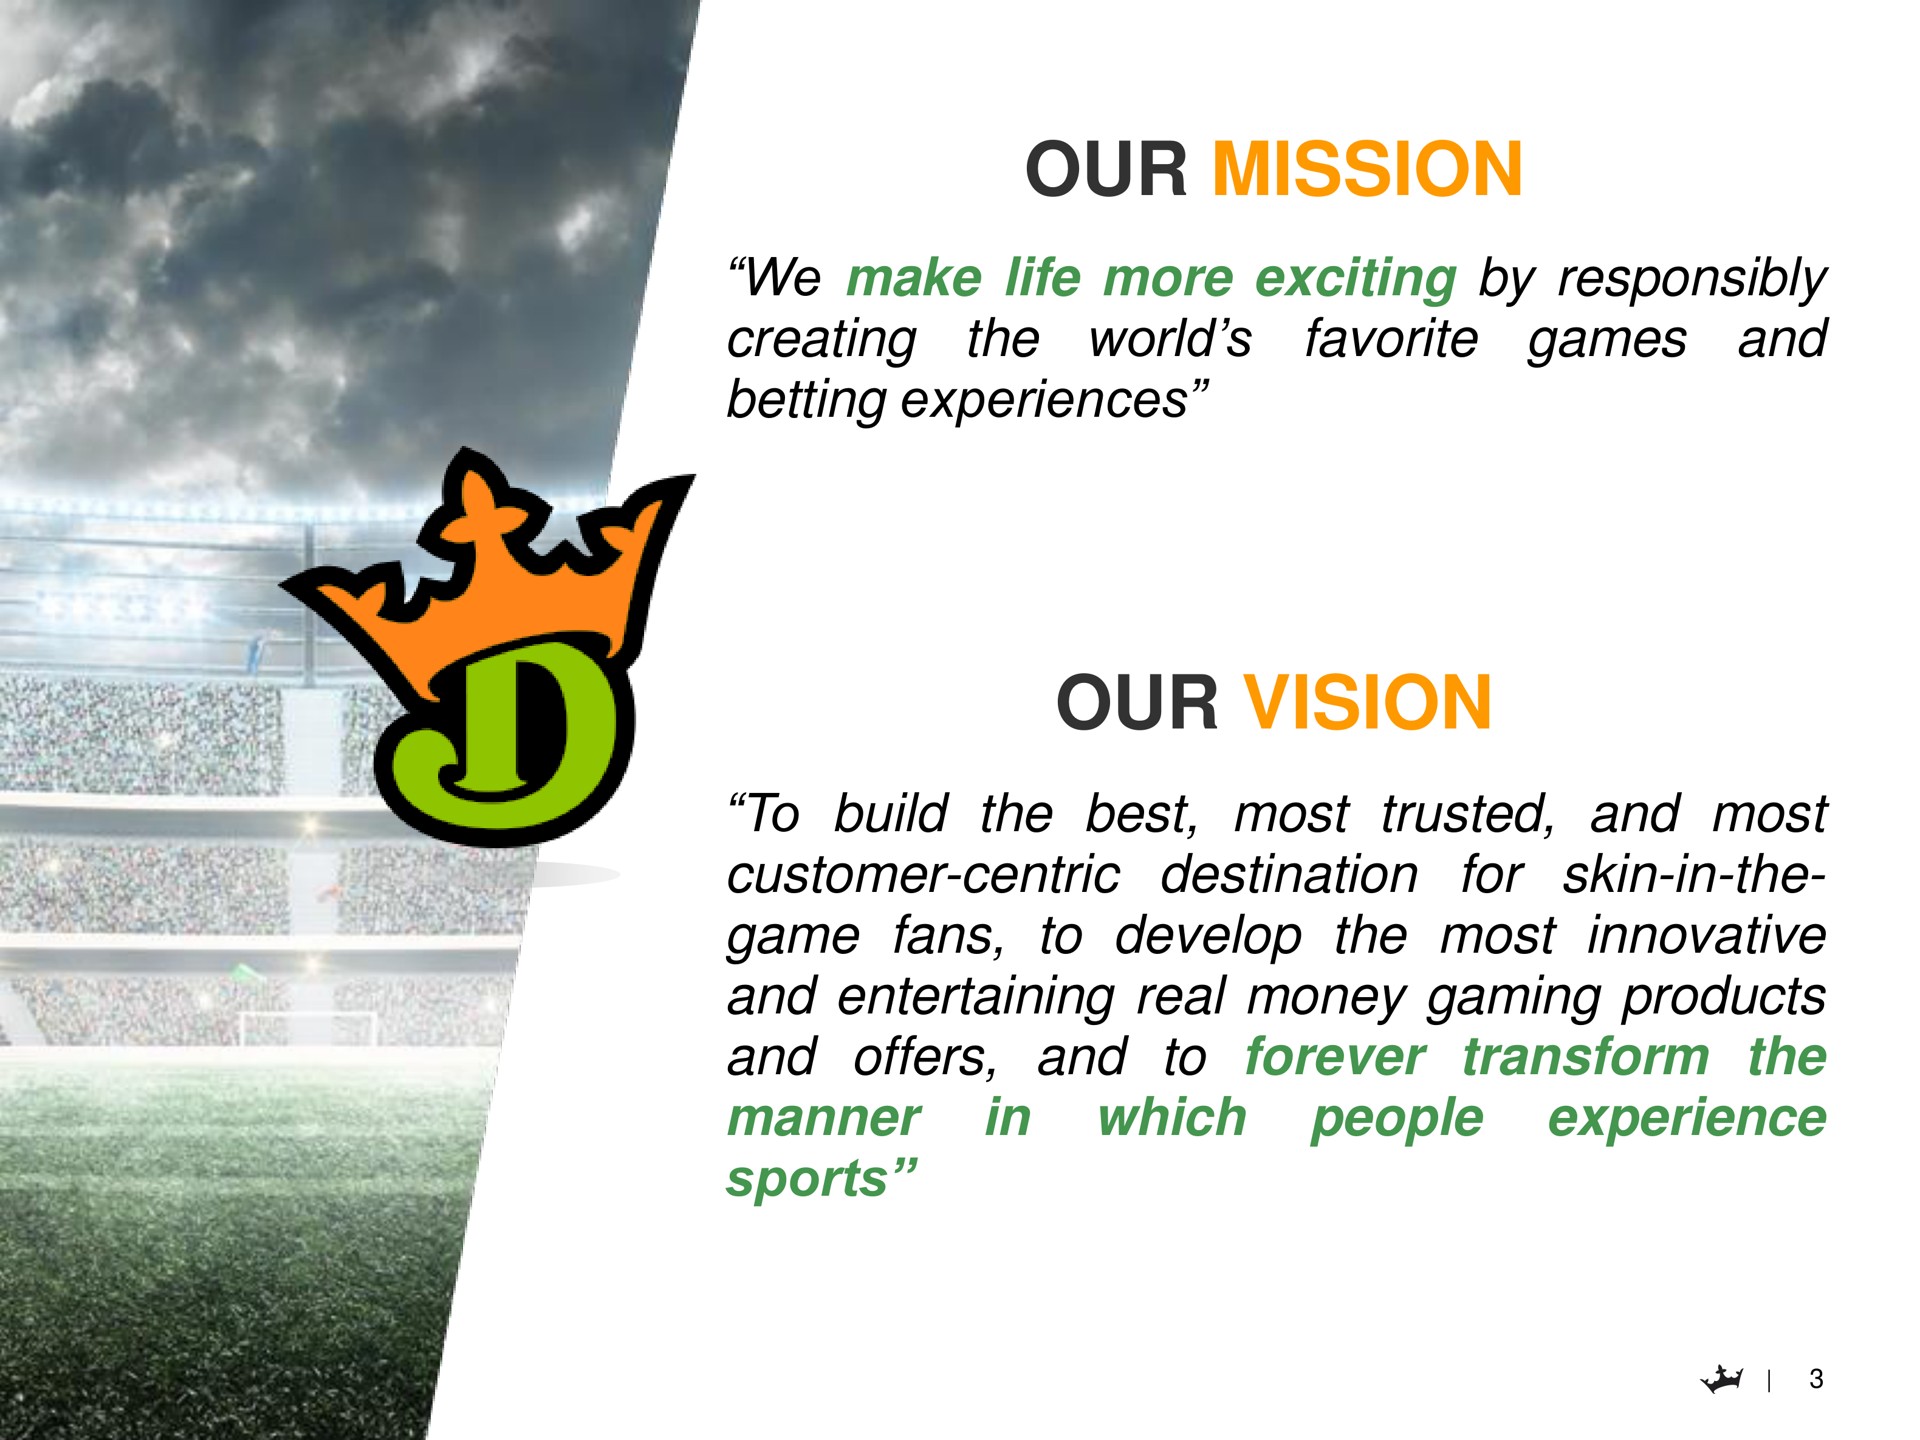 our mission we make life more exciting by responsibly favorite games and creating betting experiences the world our vision to build the best most trusted and most customer centric destination for skin in the game fans to develop the most innovative and entertaining real money gaming products and offers and to forever transform the in which people experience manner sports | DraftKings